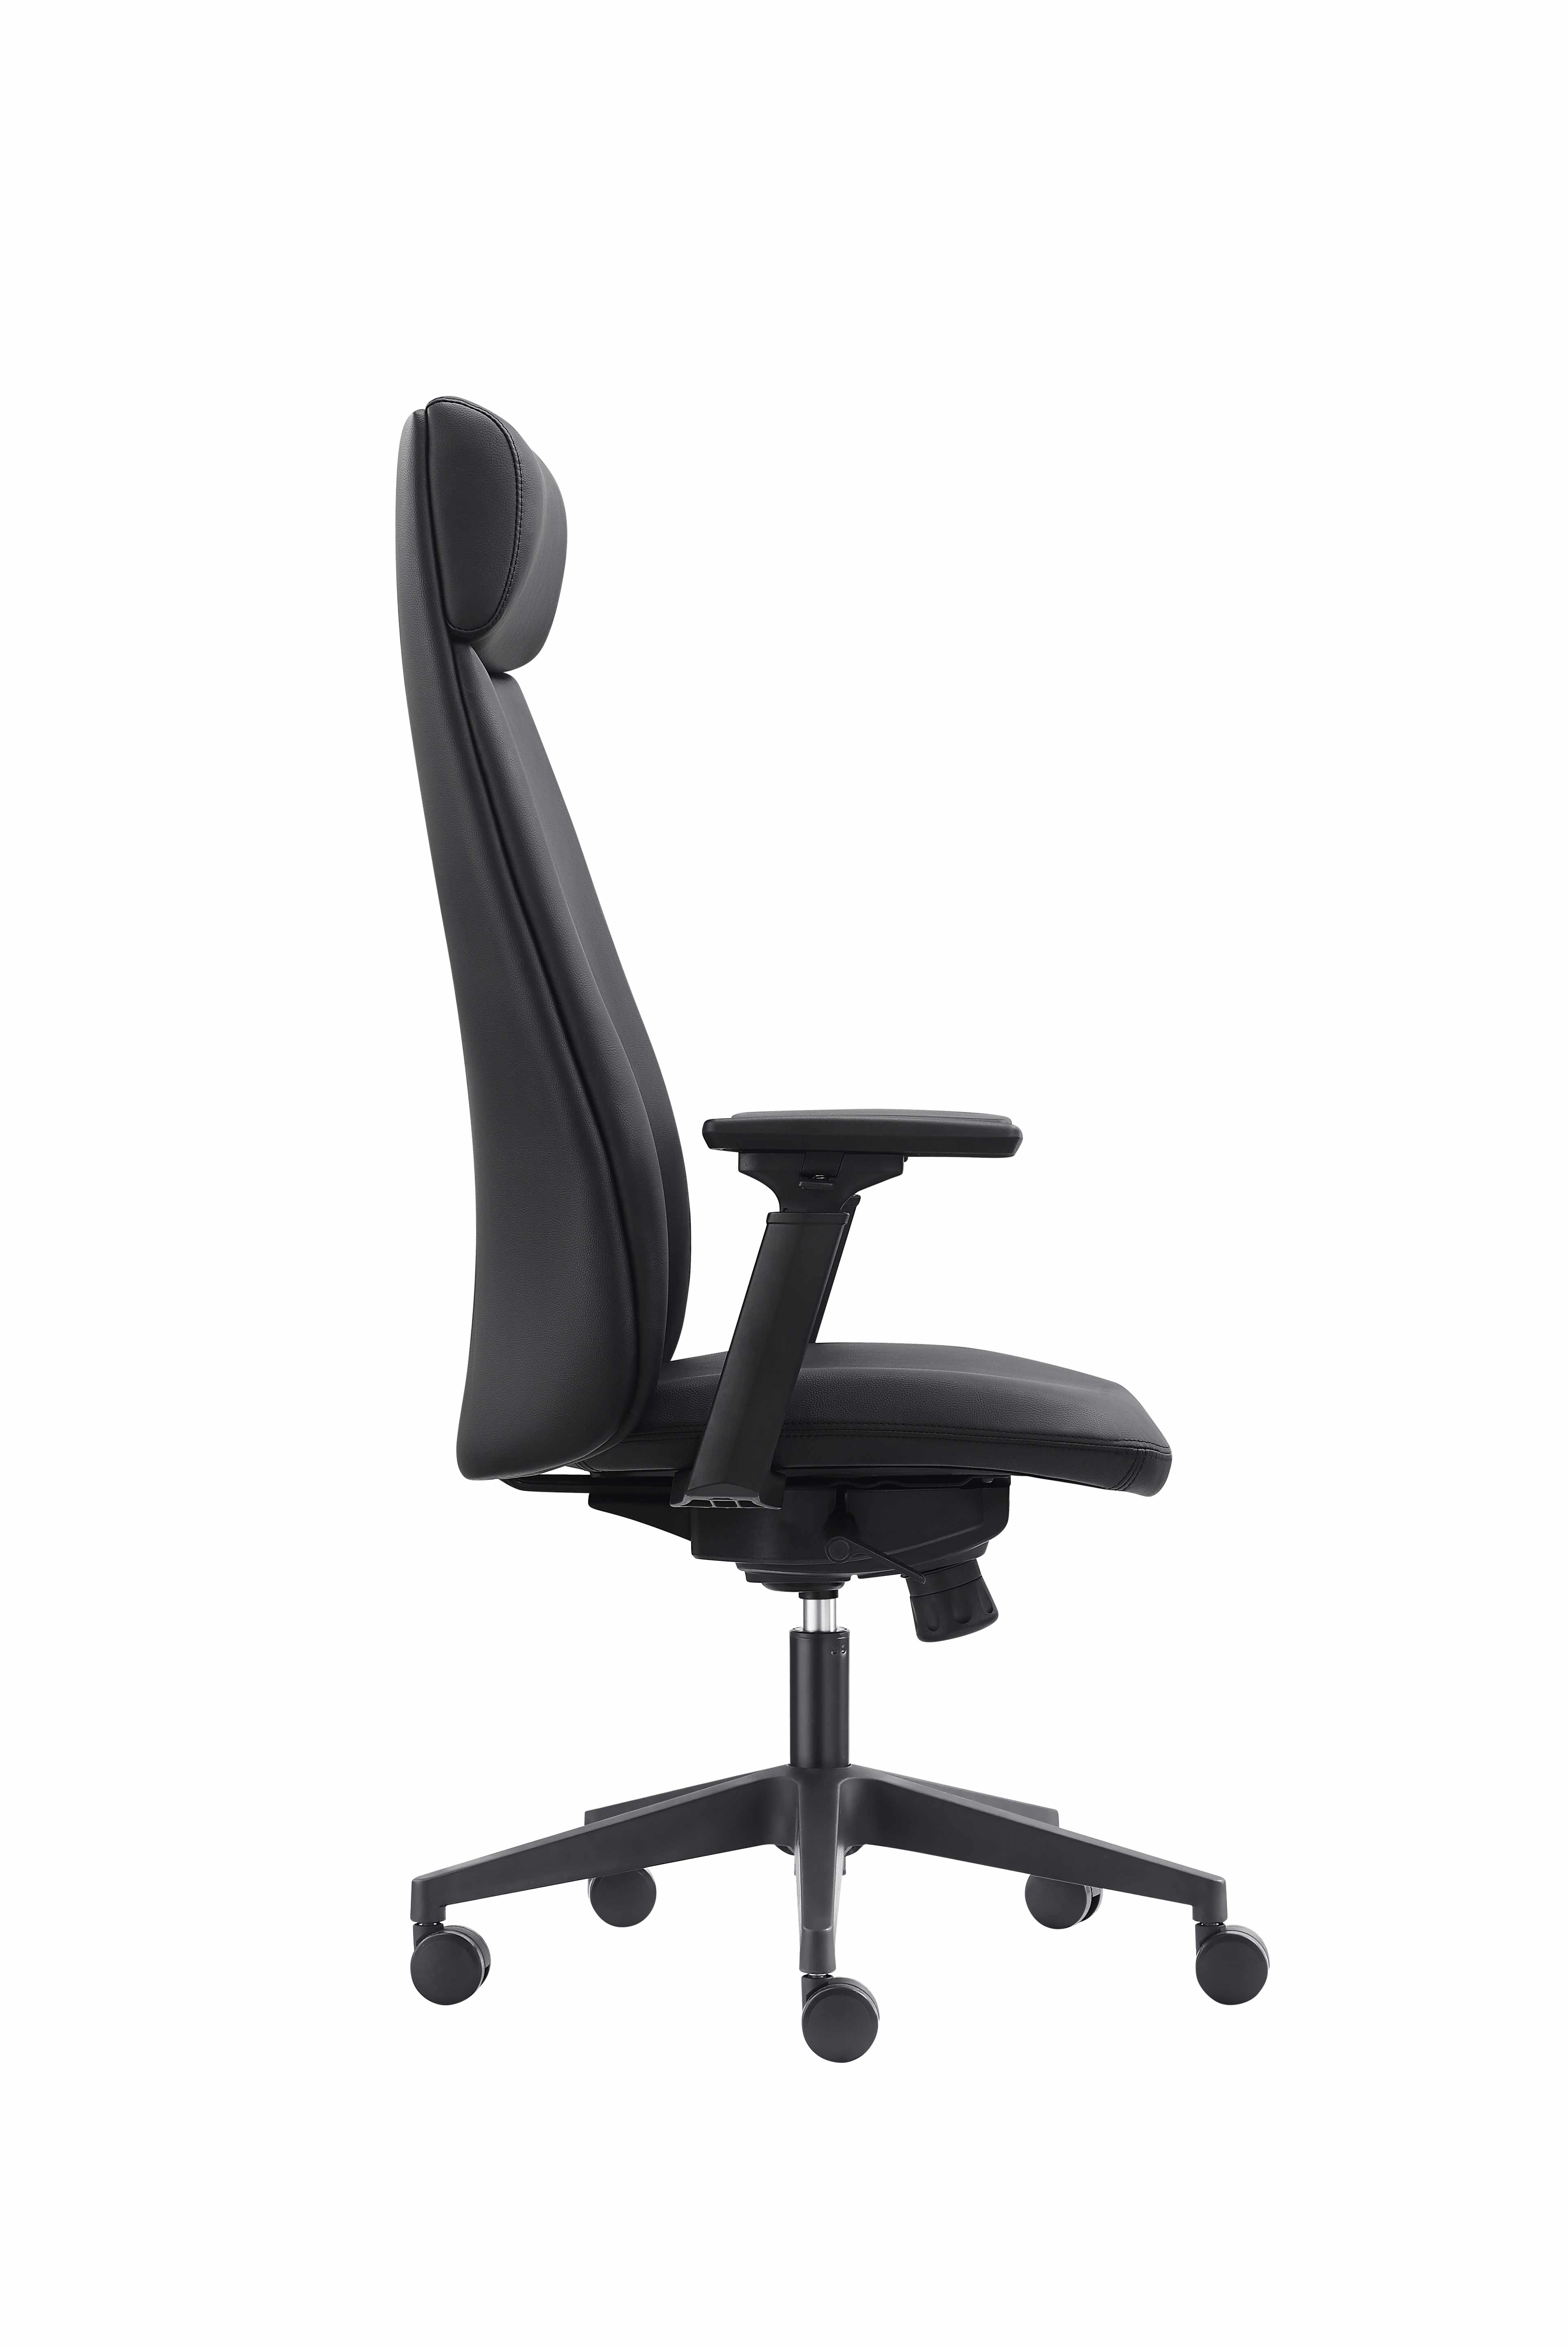 Big & Tall Office Chair for  long hours work(DU-1962H)